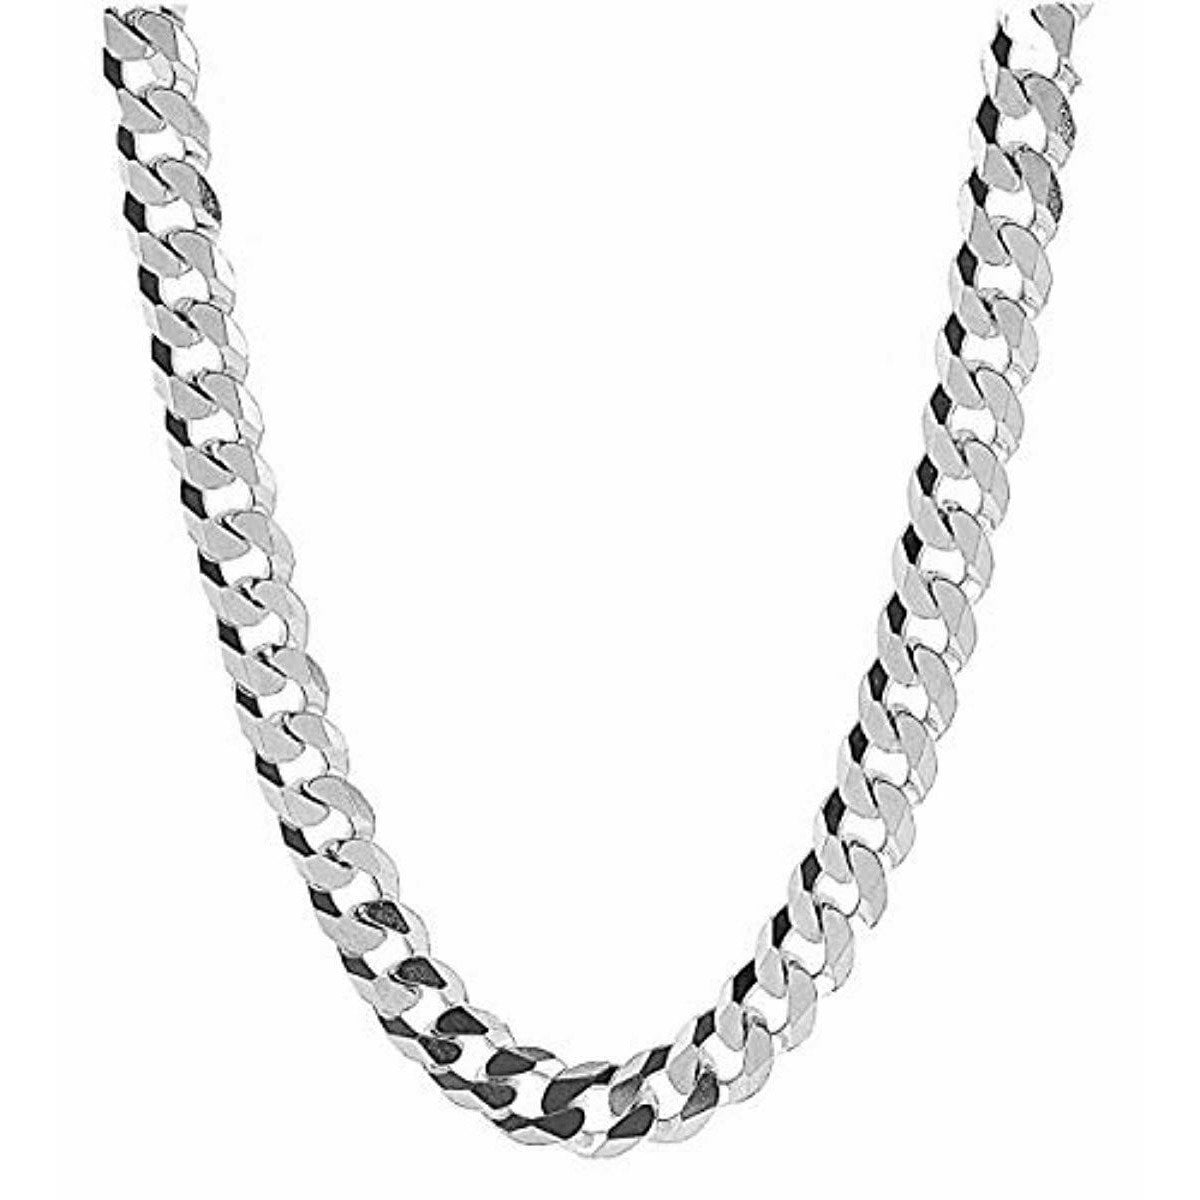 17 inches Long Thick 10mm Chain Silver Colored Heart Pendant Necklace